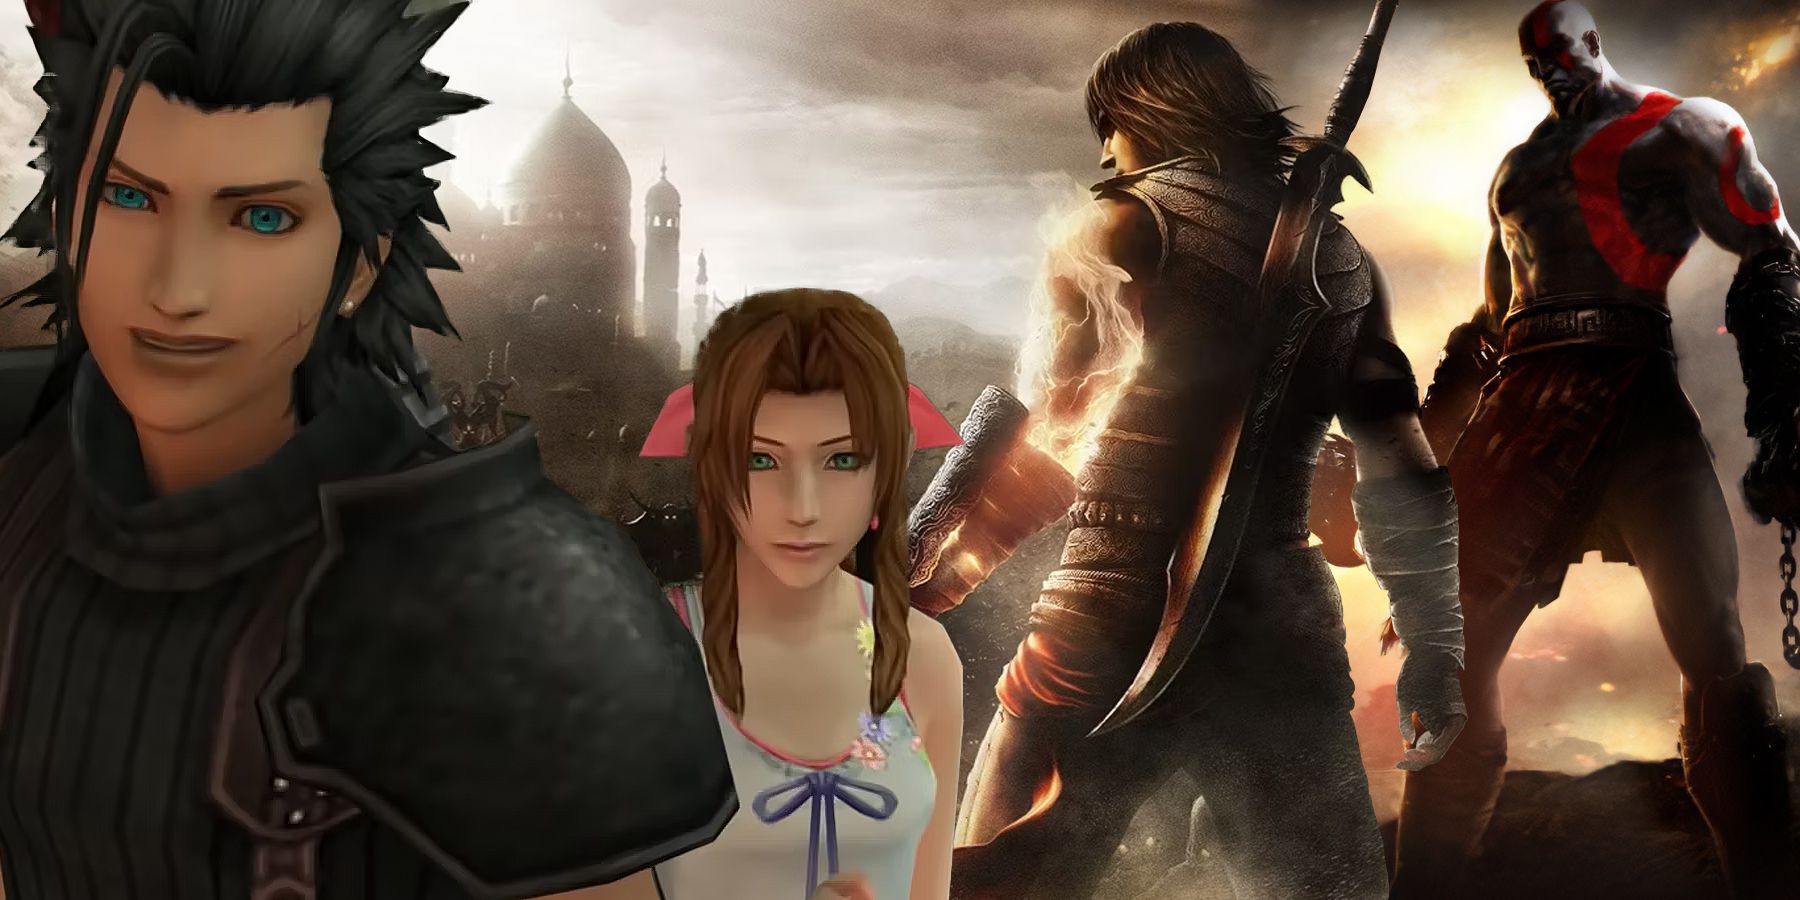 6 Best PSP JRPG Games of All Time